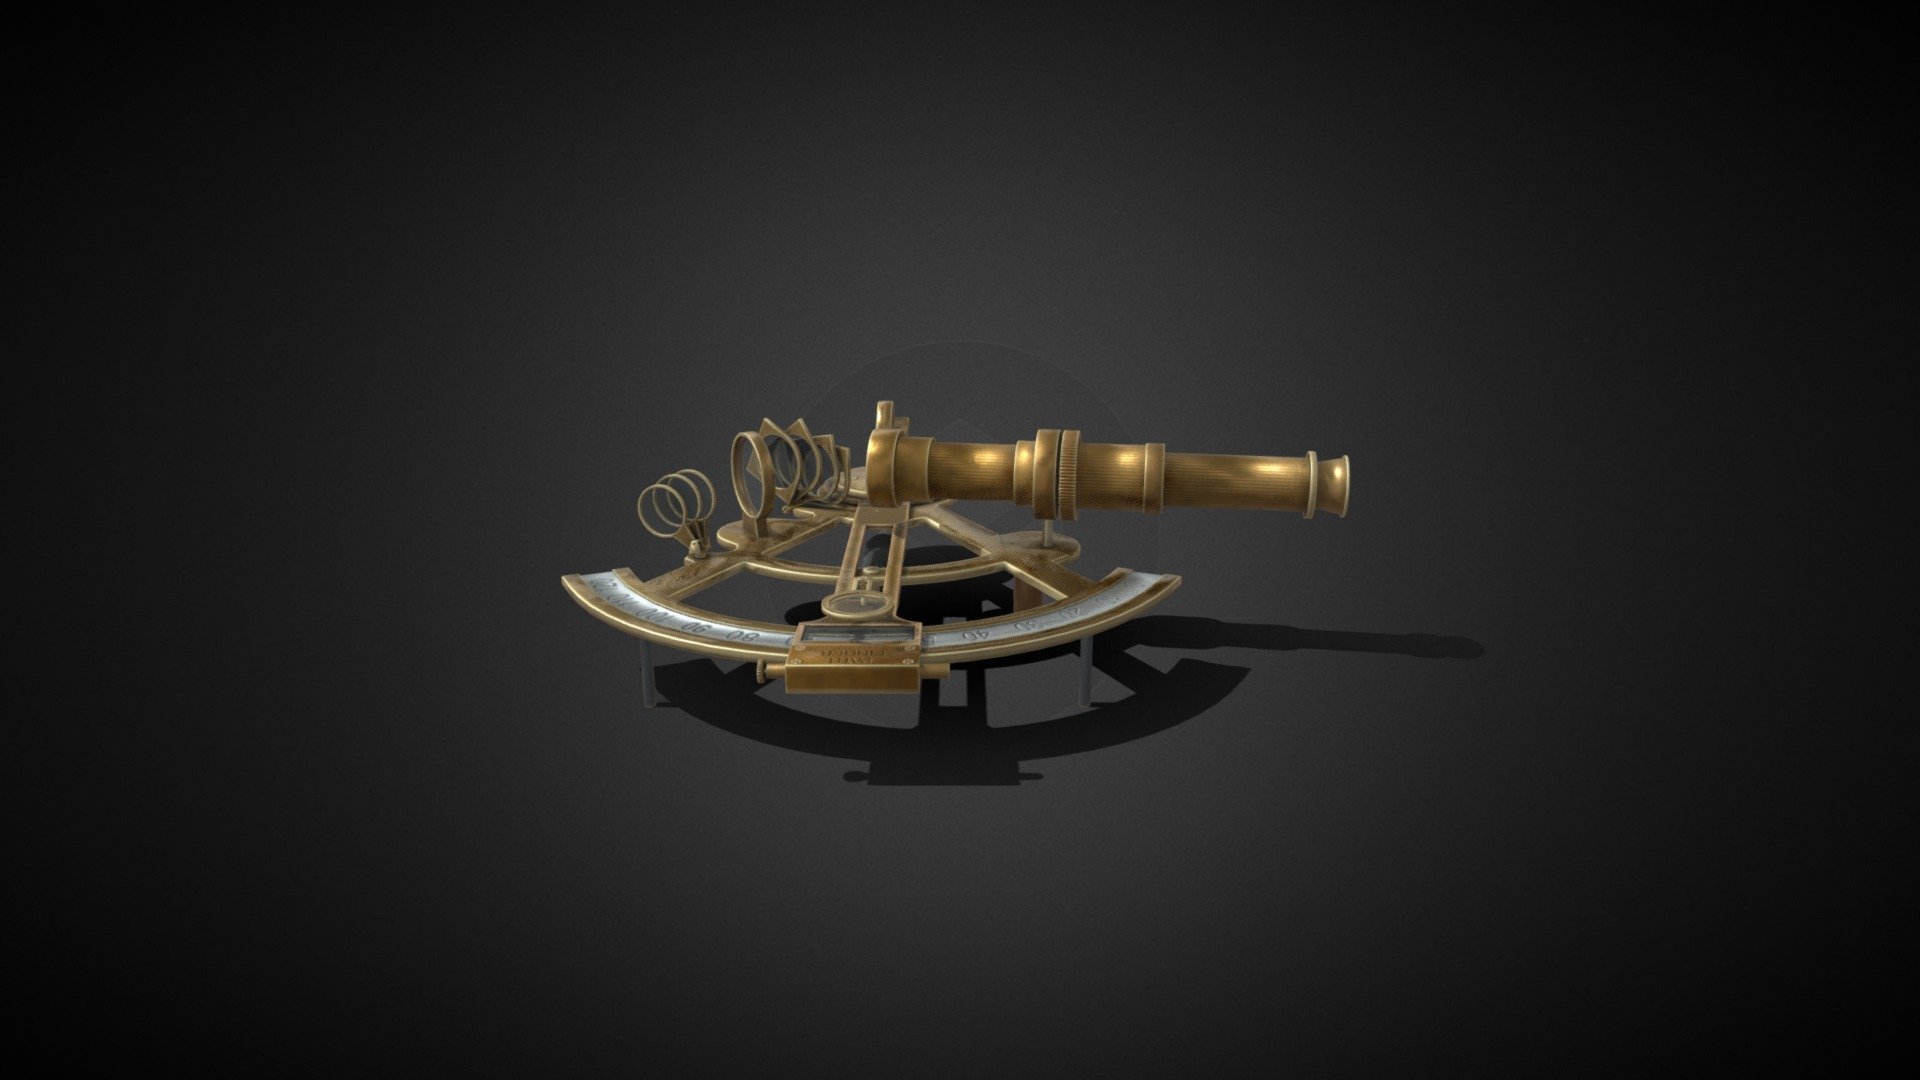 Sextant 3D model  is completely ready to be used in your games, animations, films, designs etc.

All textures and materials are included and mapped in every format.

Technical details:


File formats included in the package are: FBX, OBJ, GLB, ABC, PLY, STL, BLEND, gLTF (generated), USDZ (generated)
Native software file format: BLEND
Polygons: 8,107
Vertices: 8,101
Textures: Color, Metallic, Roughness, Normal, AO.
All textures are 2k resolution.
 - Sextant - Buy Royalty Free 3D model by 3DDisco 3d model